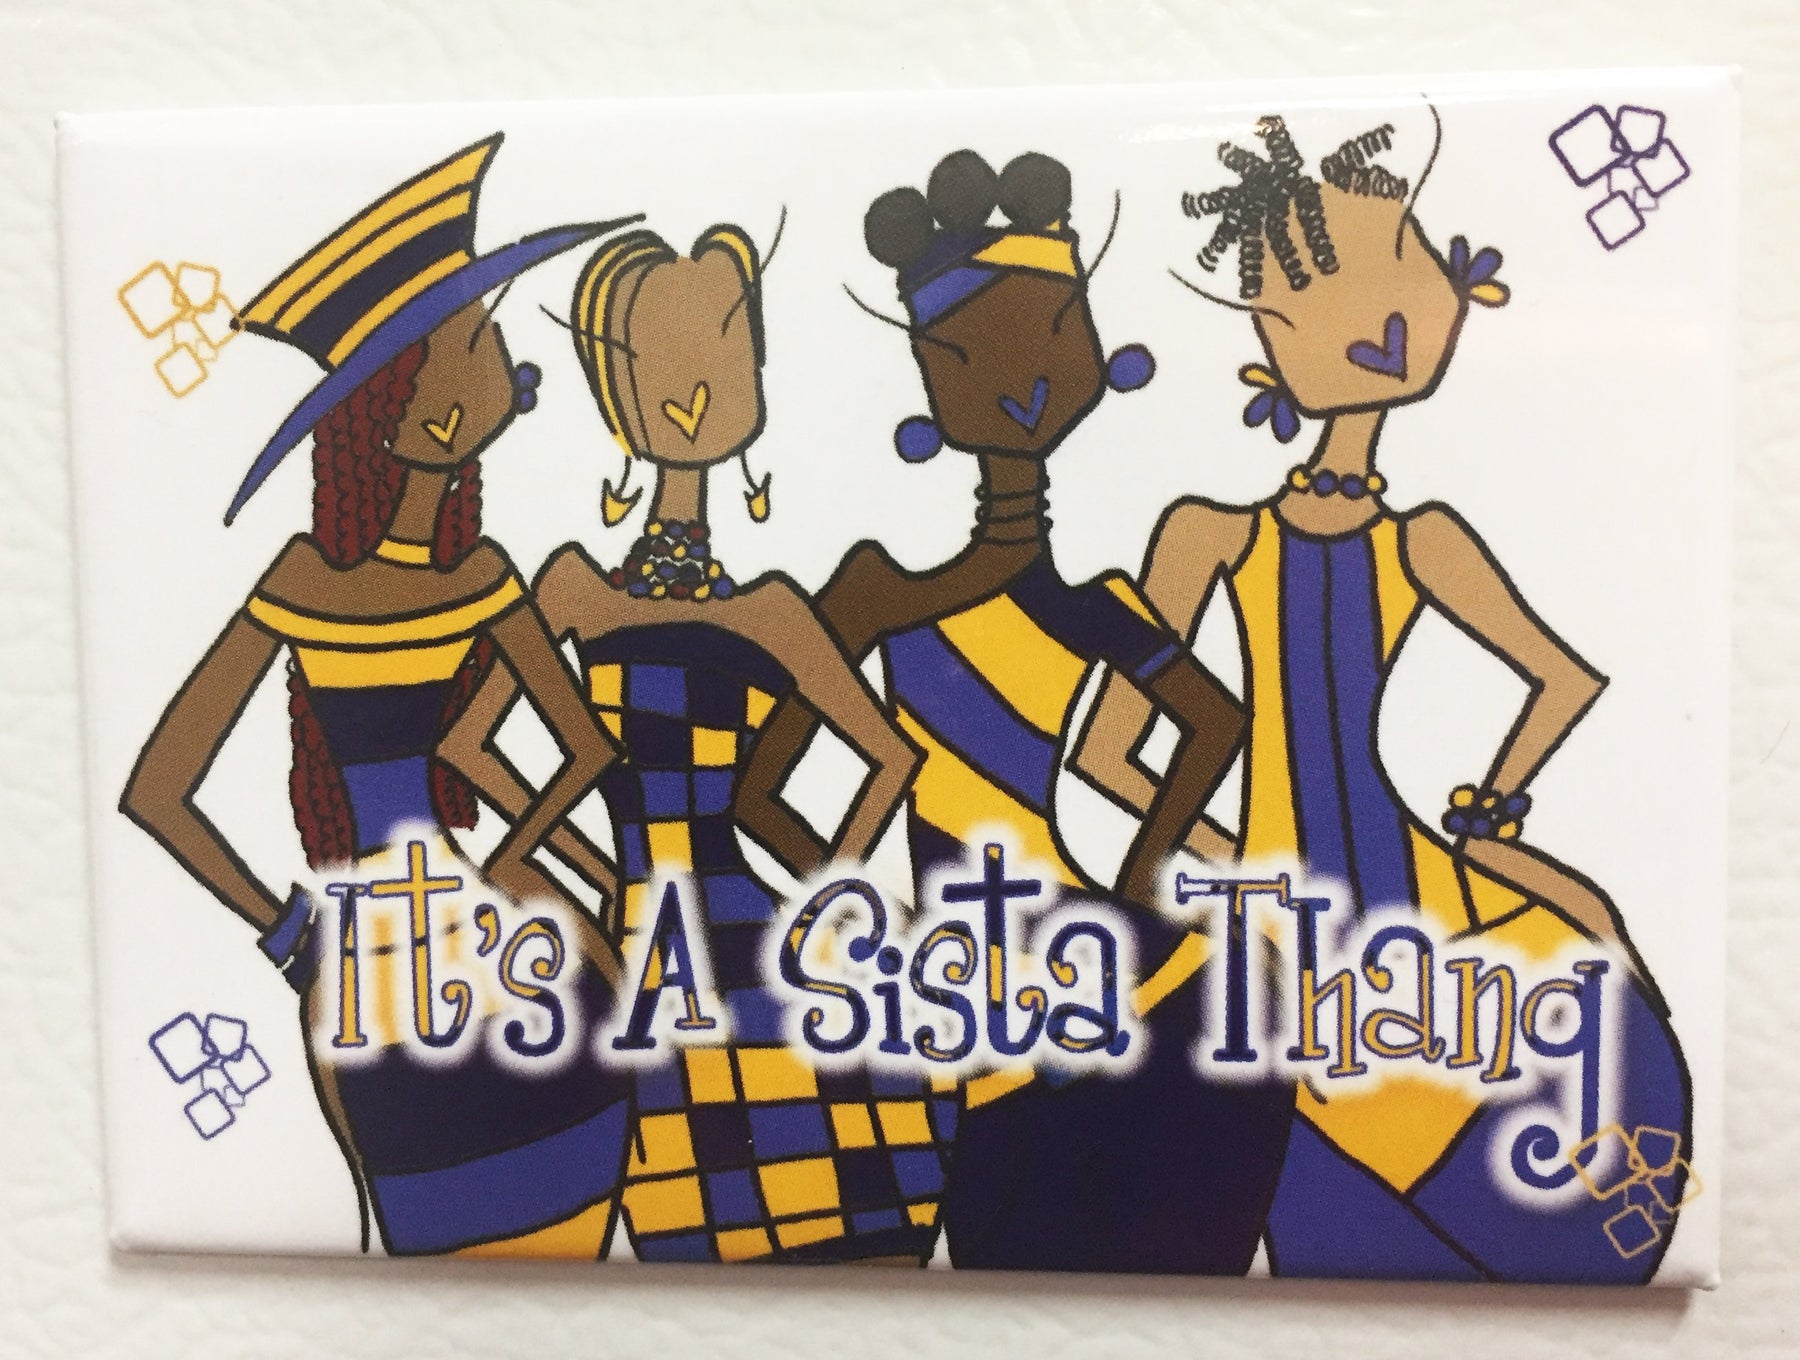 3 of 3: It's a Sista Thang (Sigma Gamma Rho): African American Magnet by Kiwi McDowell